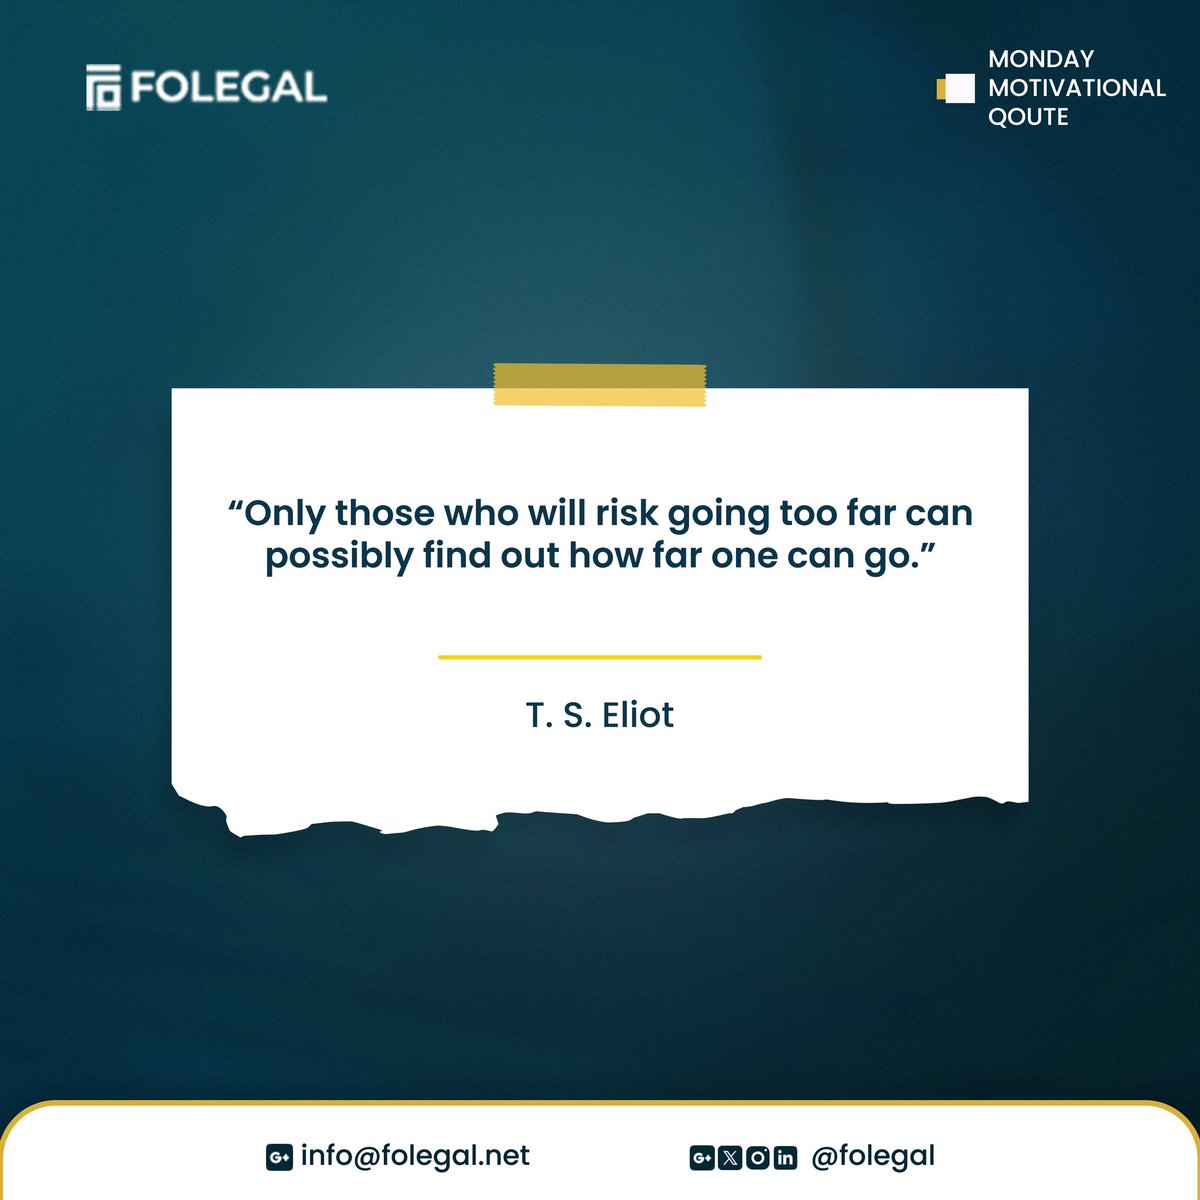 Only those who will risk going too far can possibly find out how far one can go. – T. S. Eliot

#FOLEGAL #lagos #lagoslawyer #mondaymotivation #law #nigerianlawyers #legalpractice #legalprofession